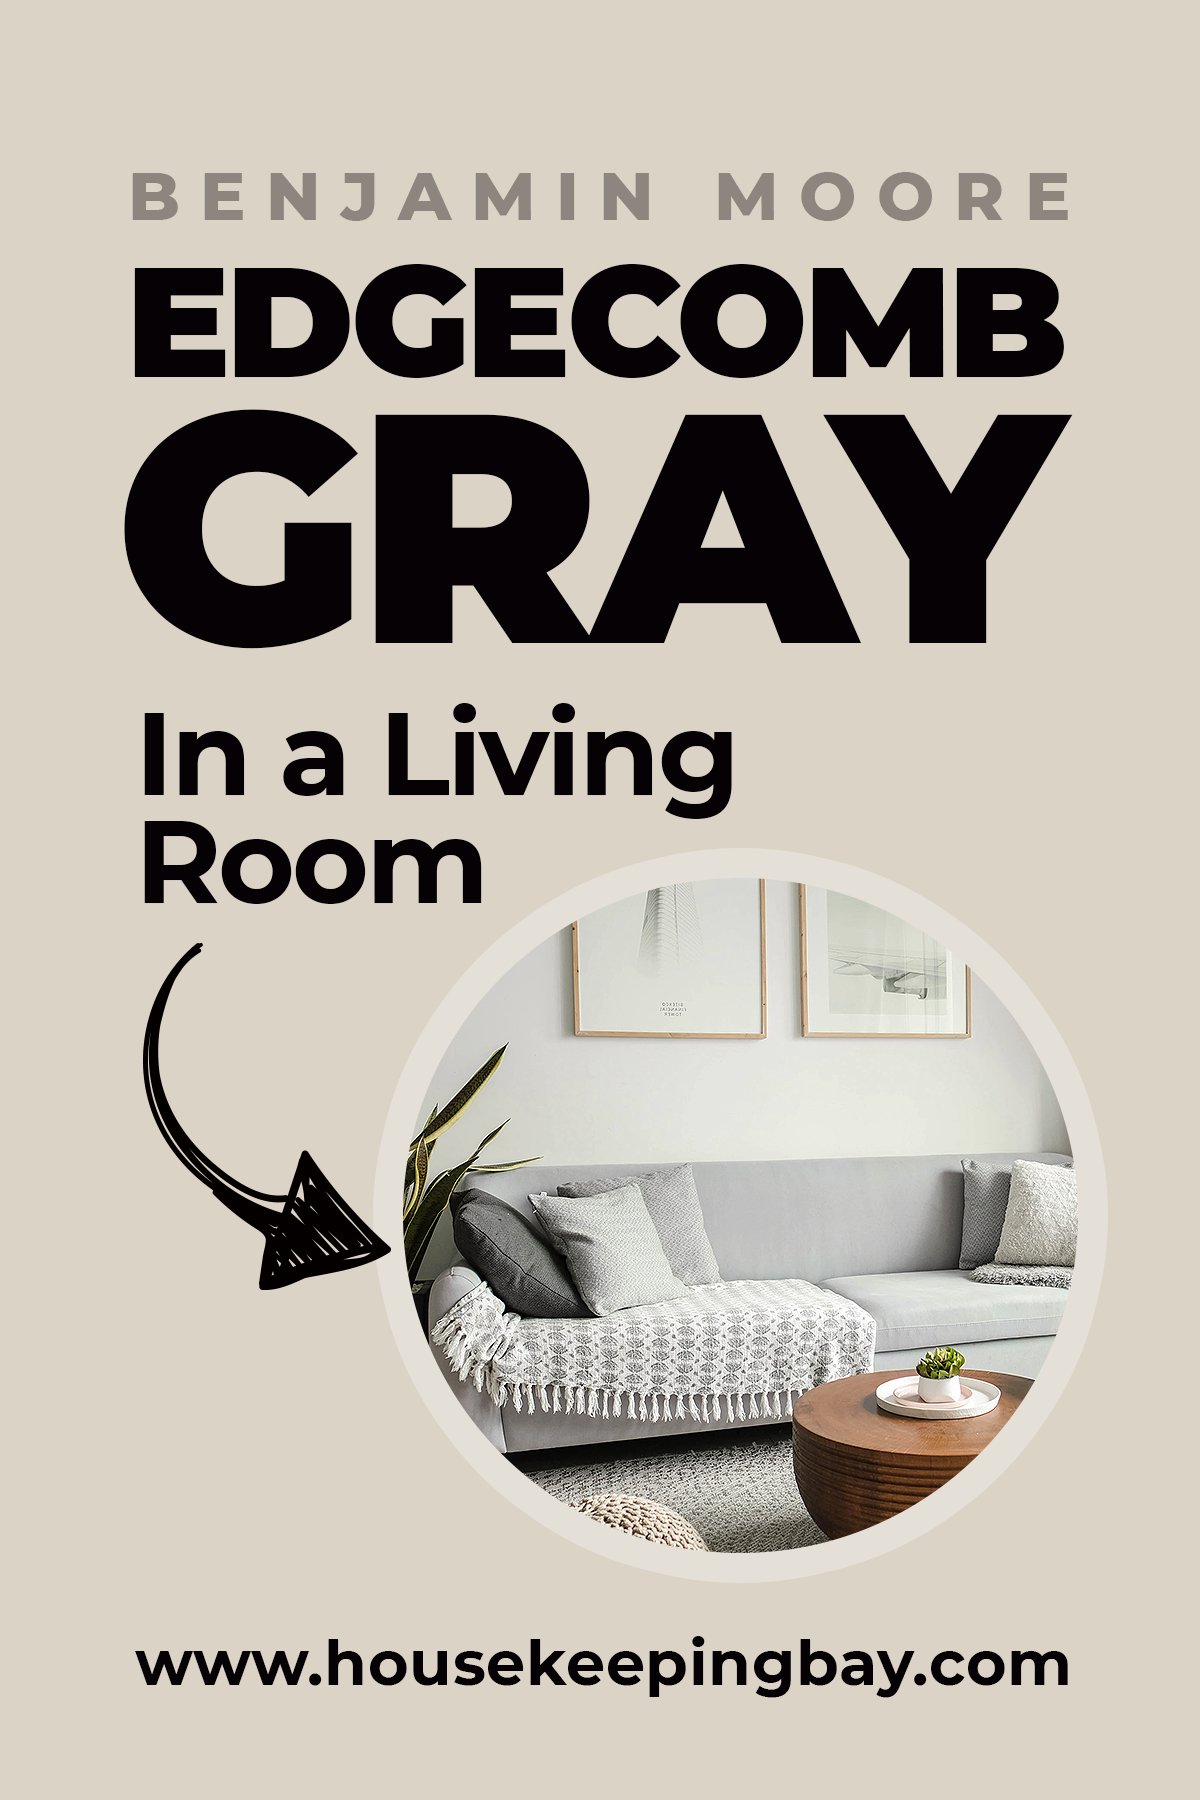 Edgecomb Gray In a Living Room